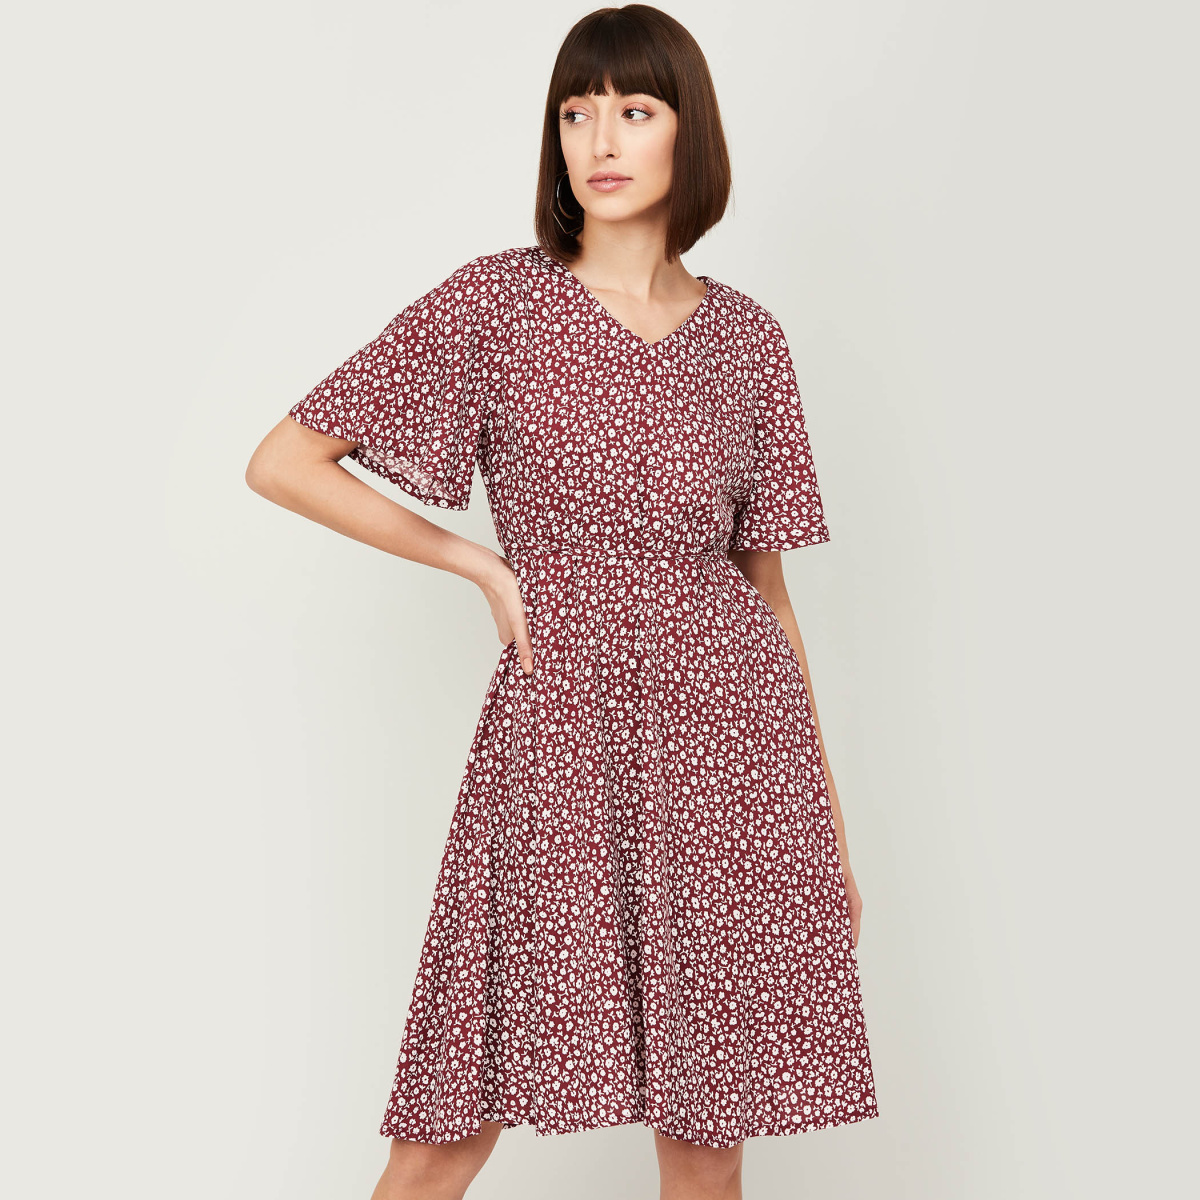 FAME FOREVER Women Printed A-Line Dress